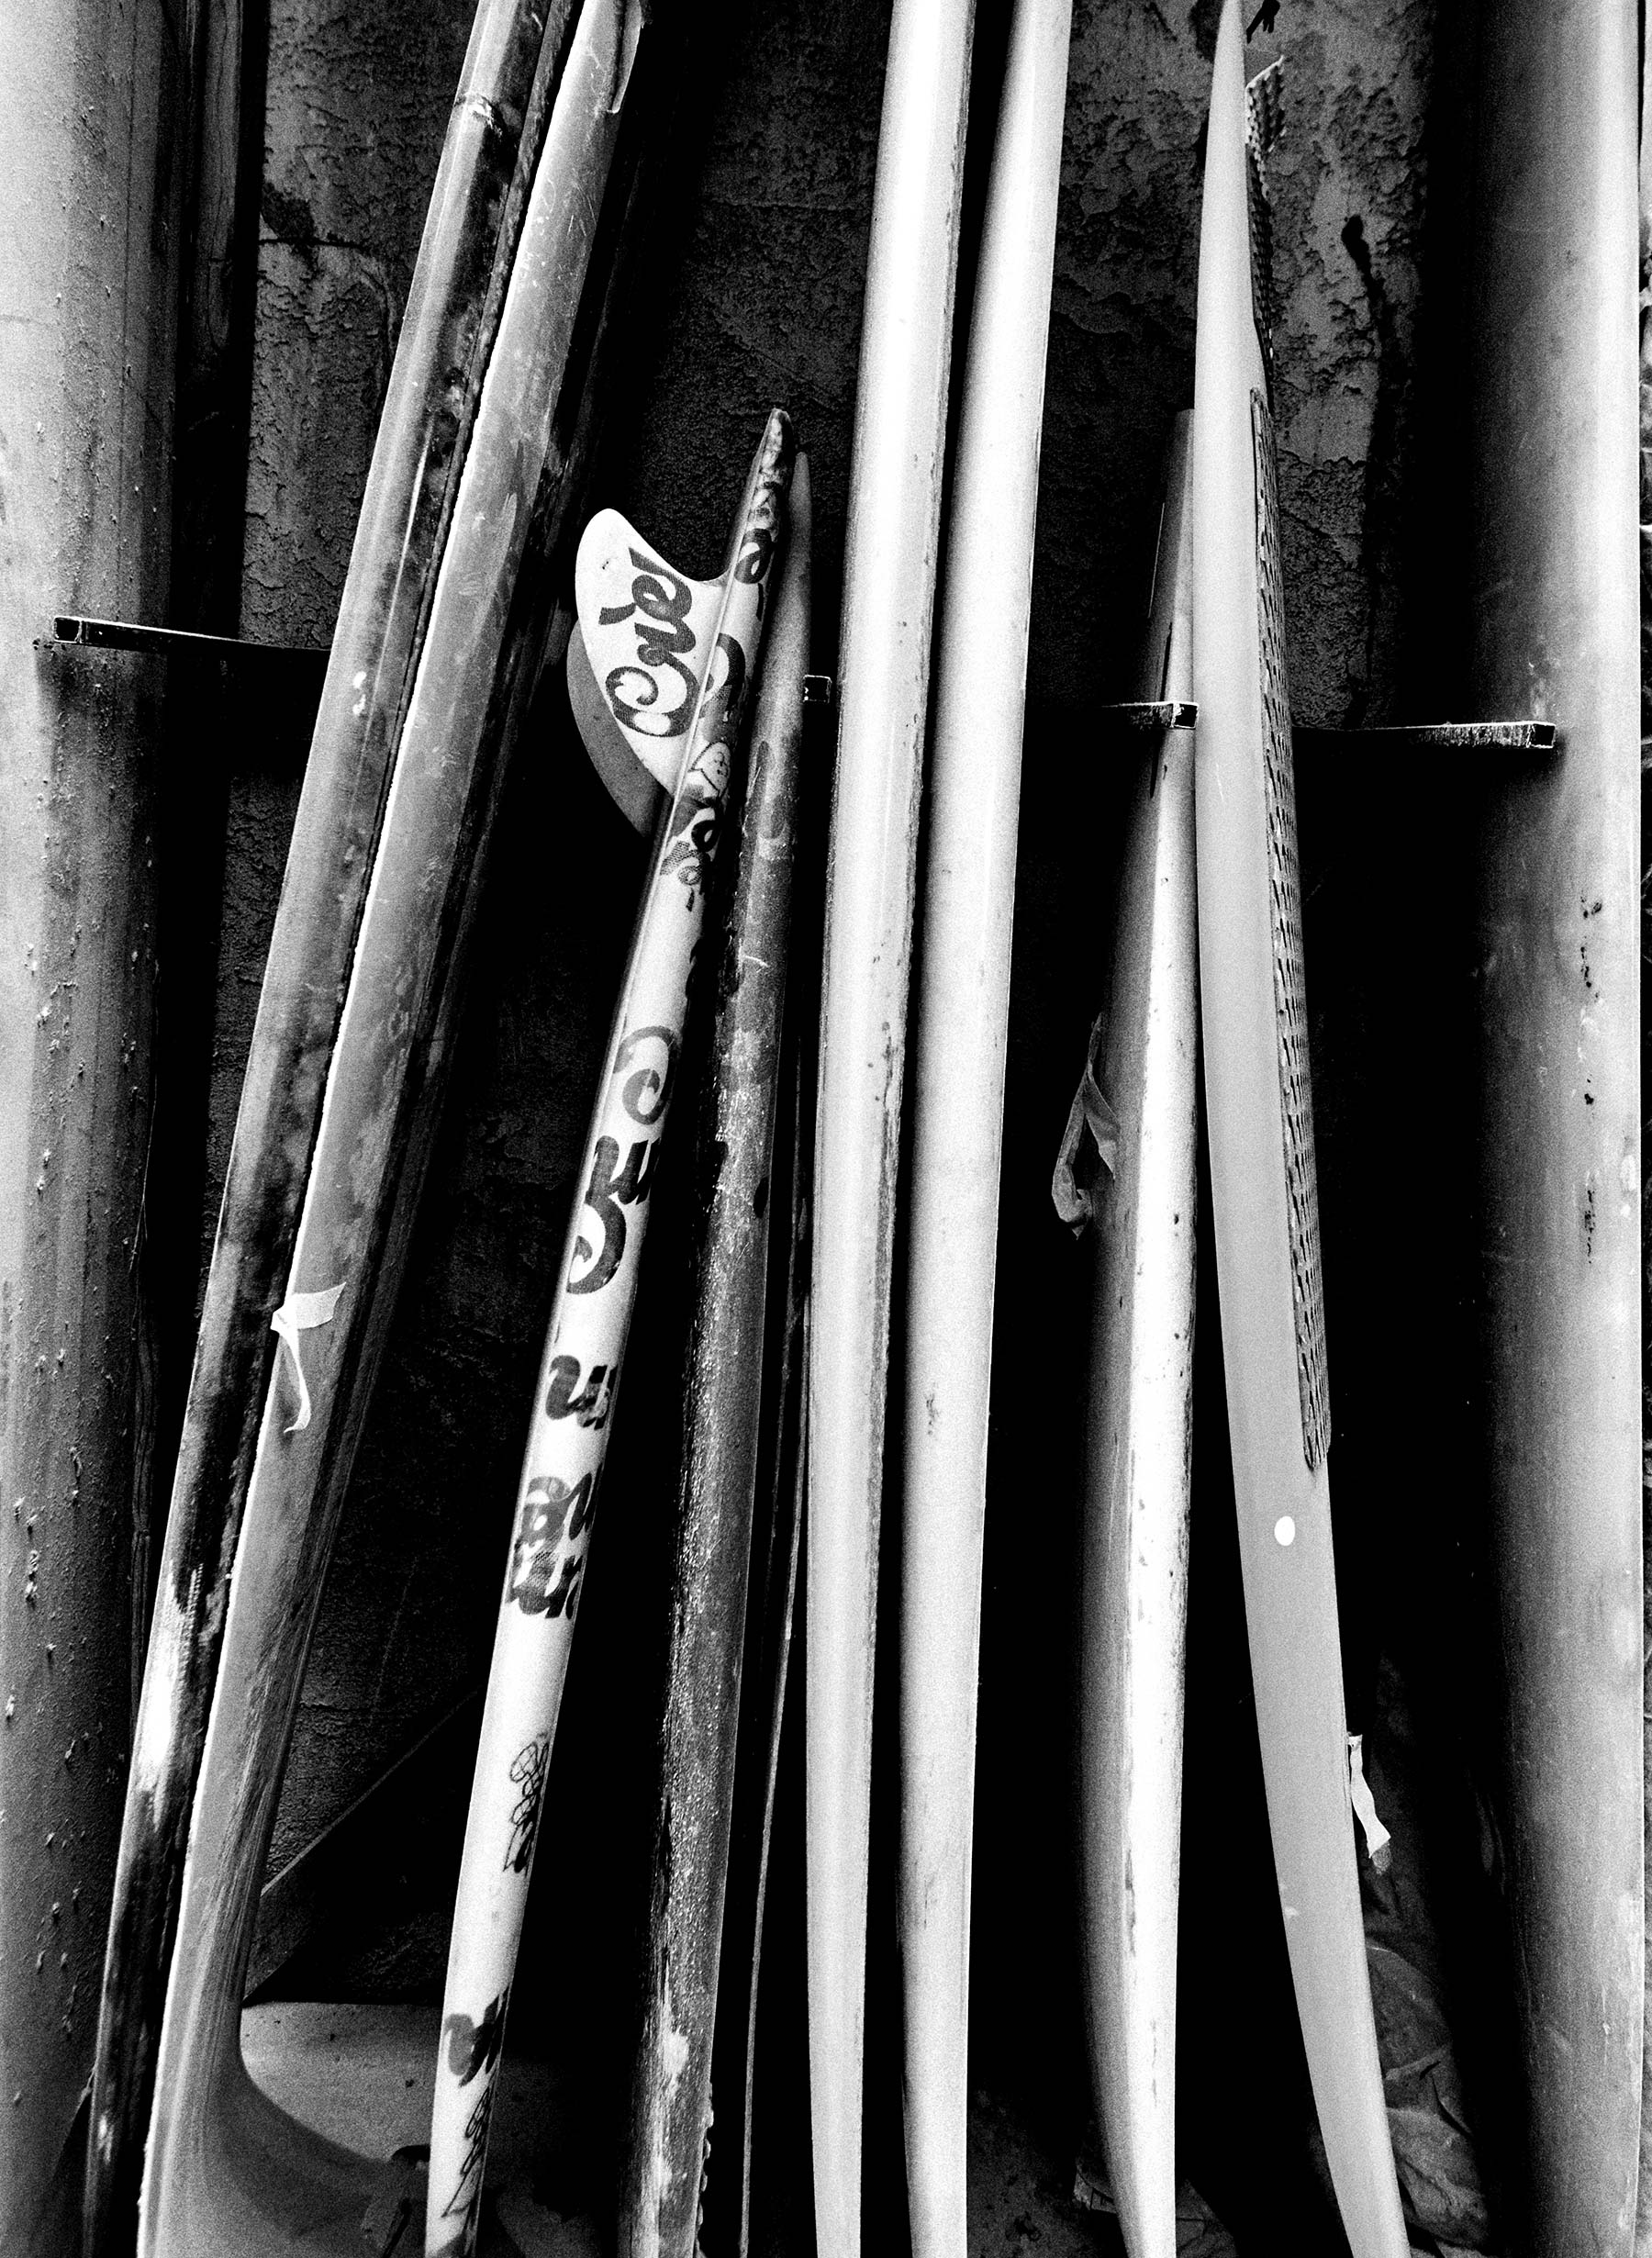 Wood, Tints and shades, Font, Parallel, Metal, Monochrome, Monochrome photography, Pattern, Still life photography, Steel